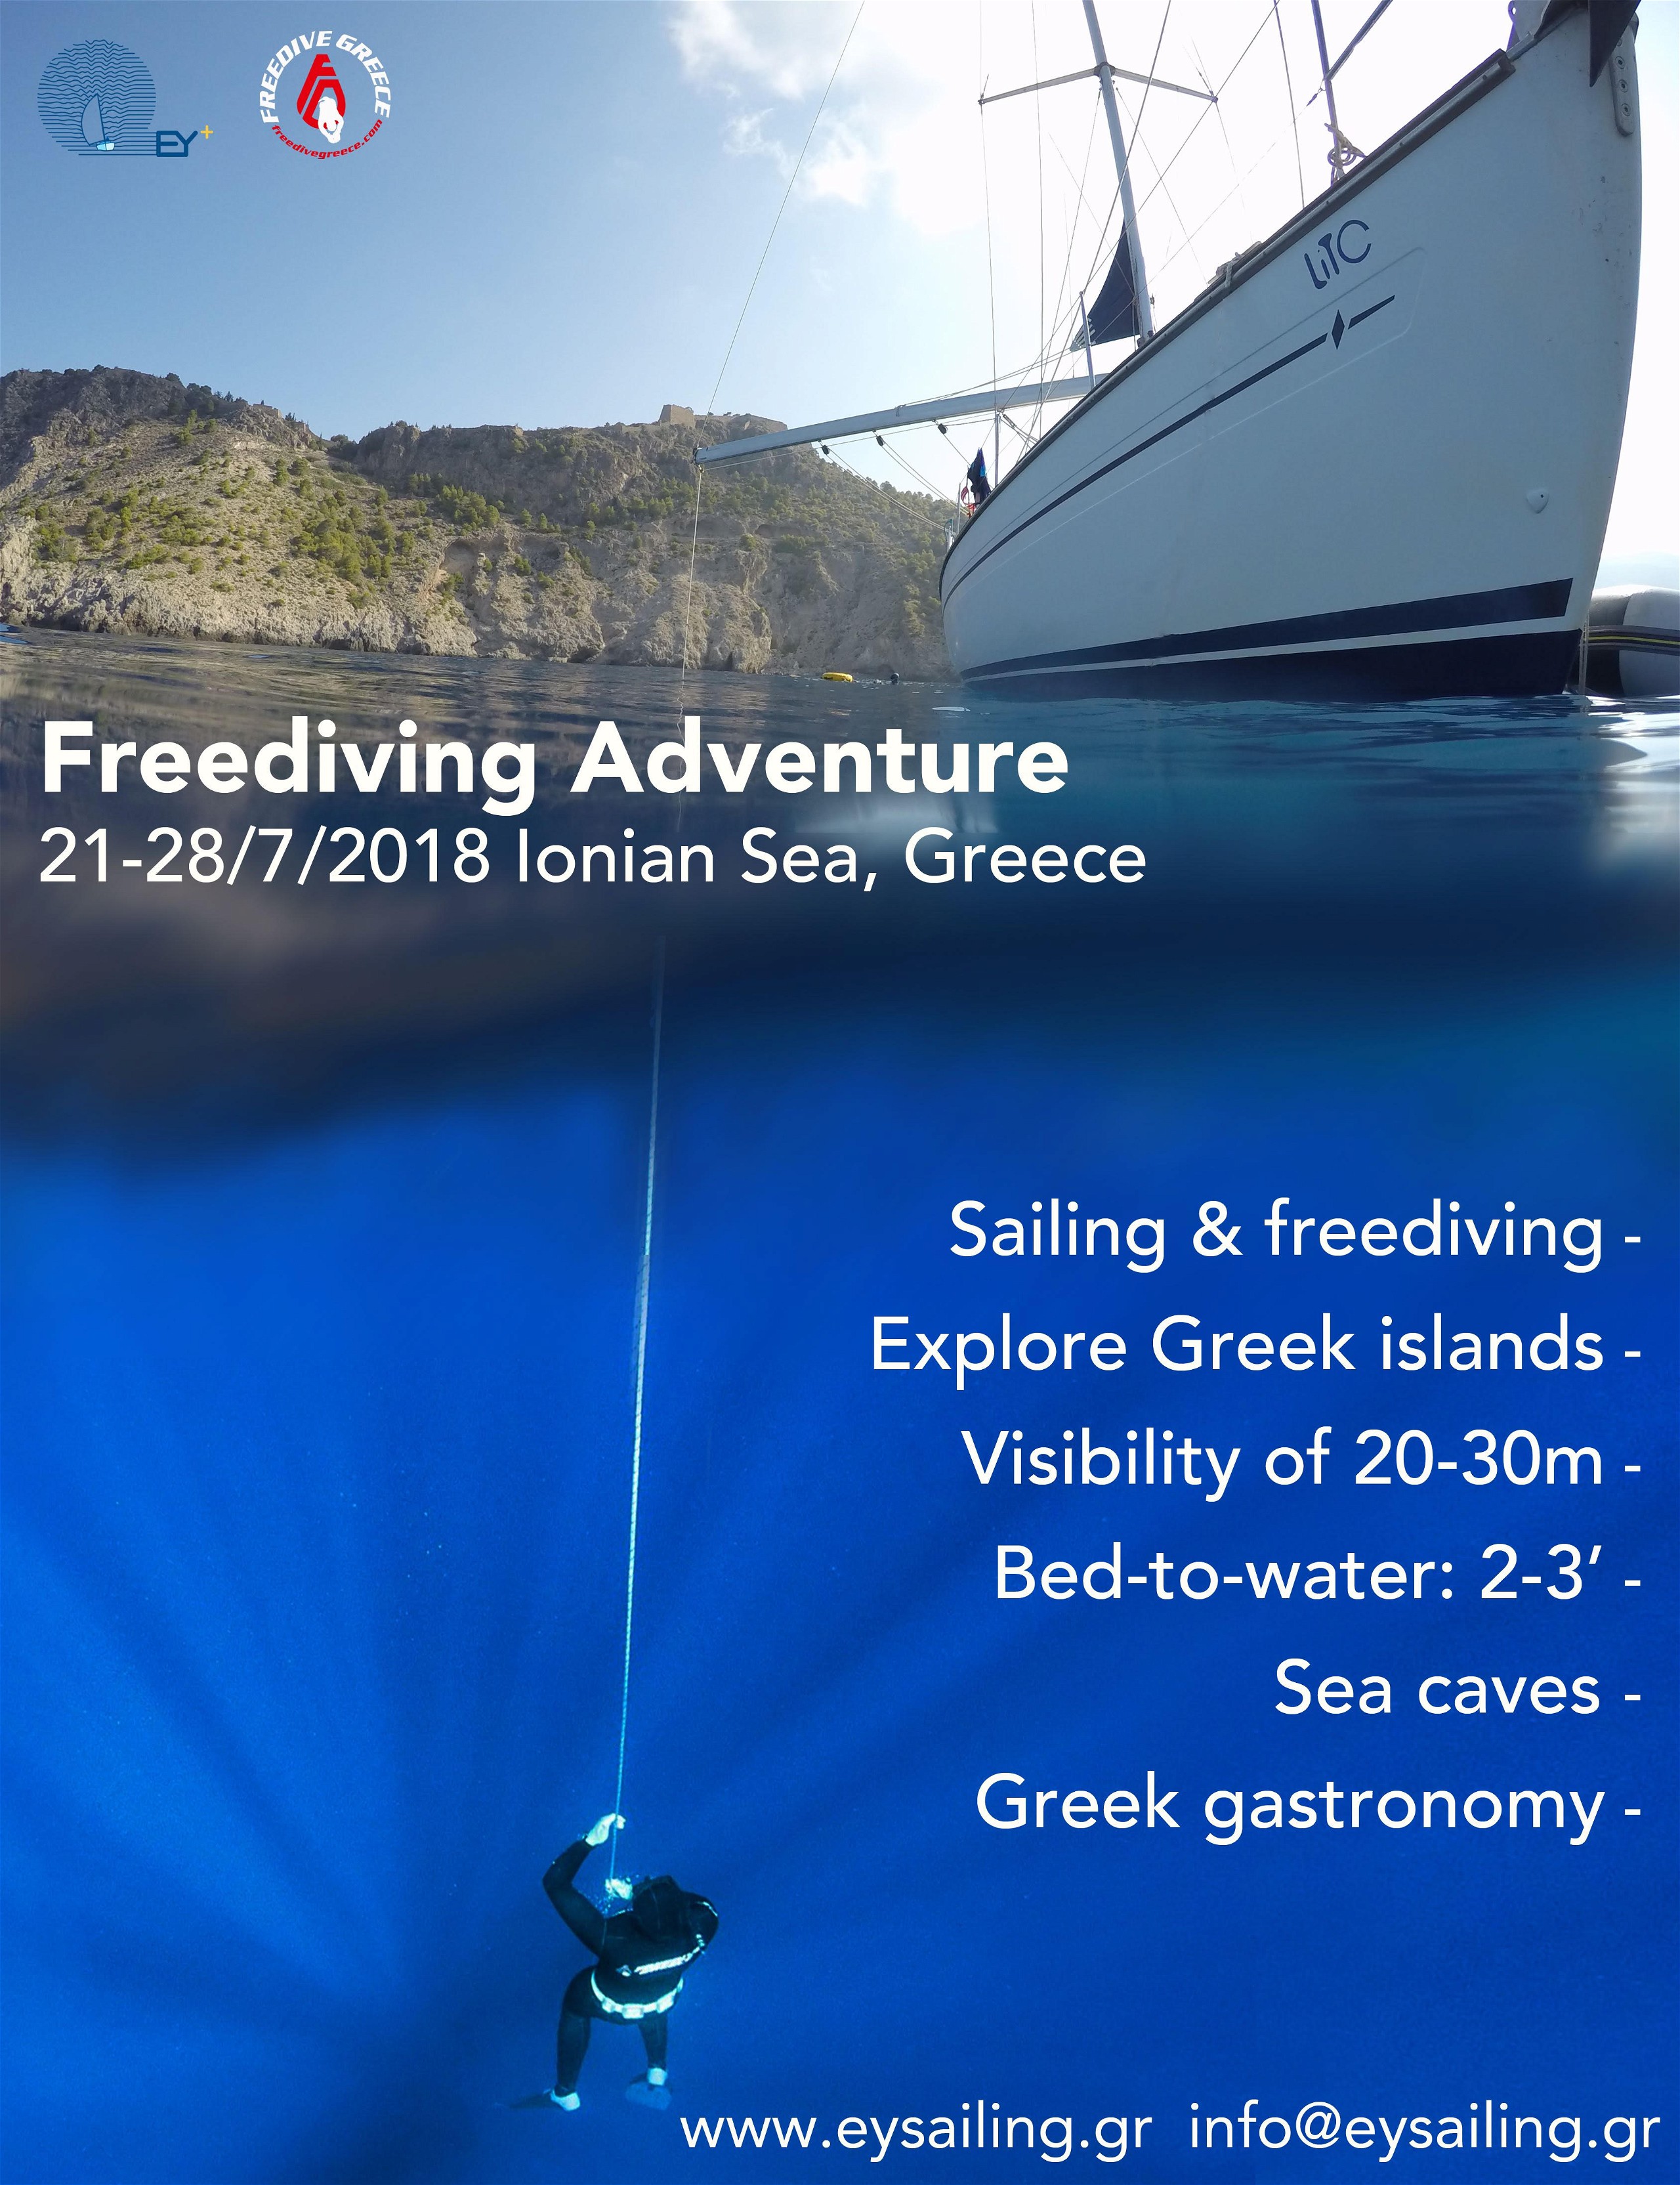 Second Annual Freediving/Sailing Trip Off The Greek Coast Scheduled